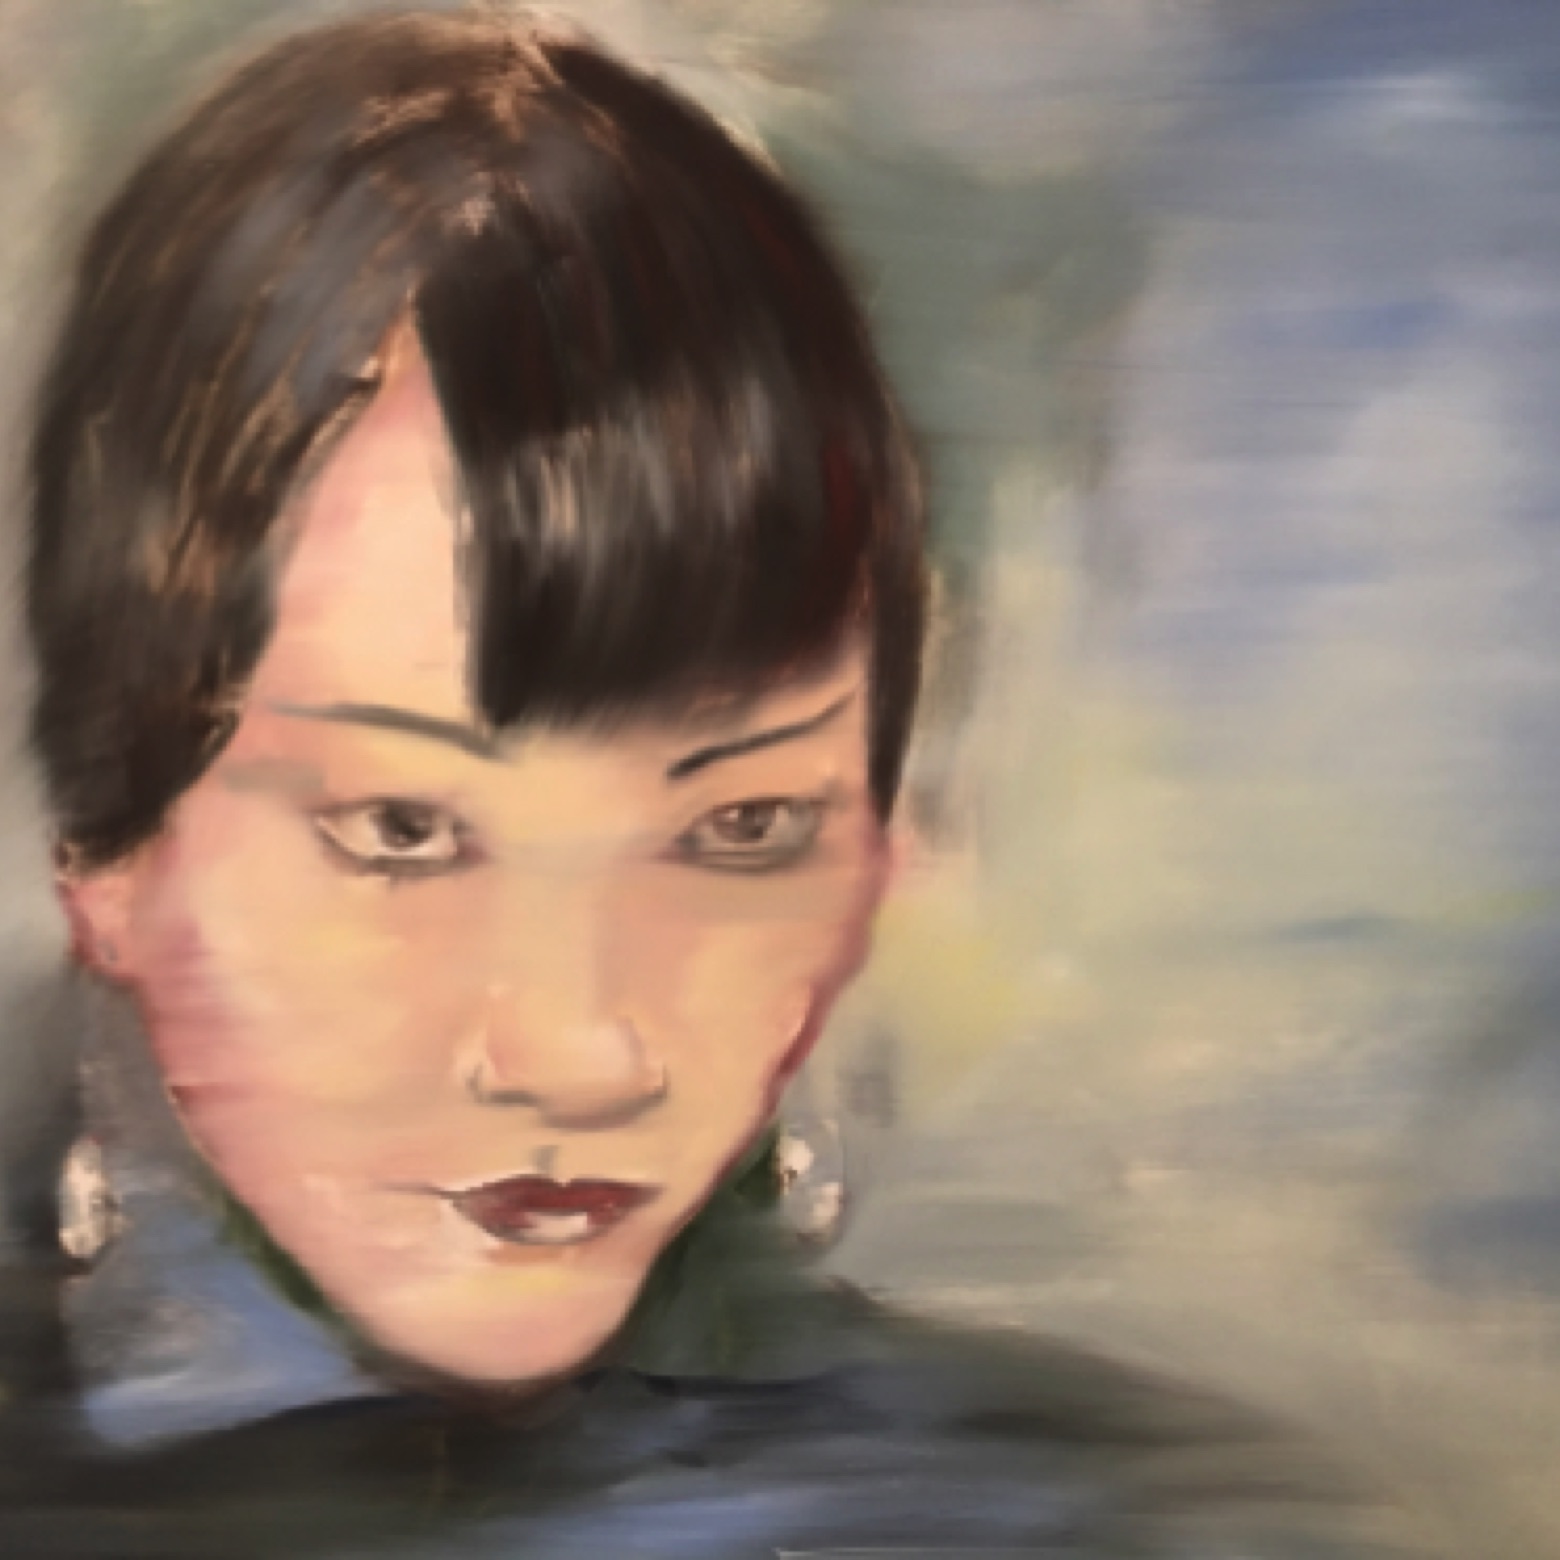 Gregg Chadwick
Anna May Wong
36"x48"oil on linen 2015
Ailsa Chang Collection, Culver City, California